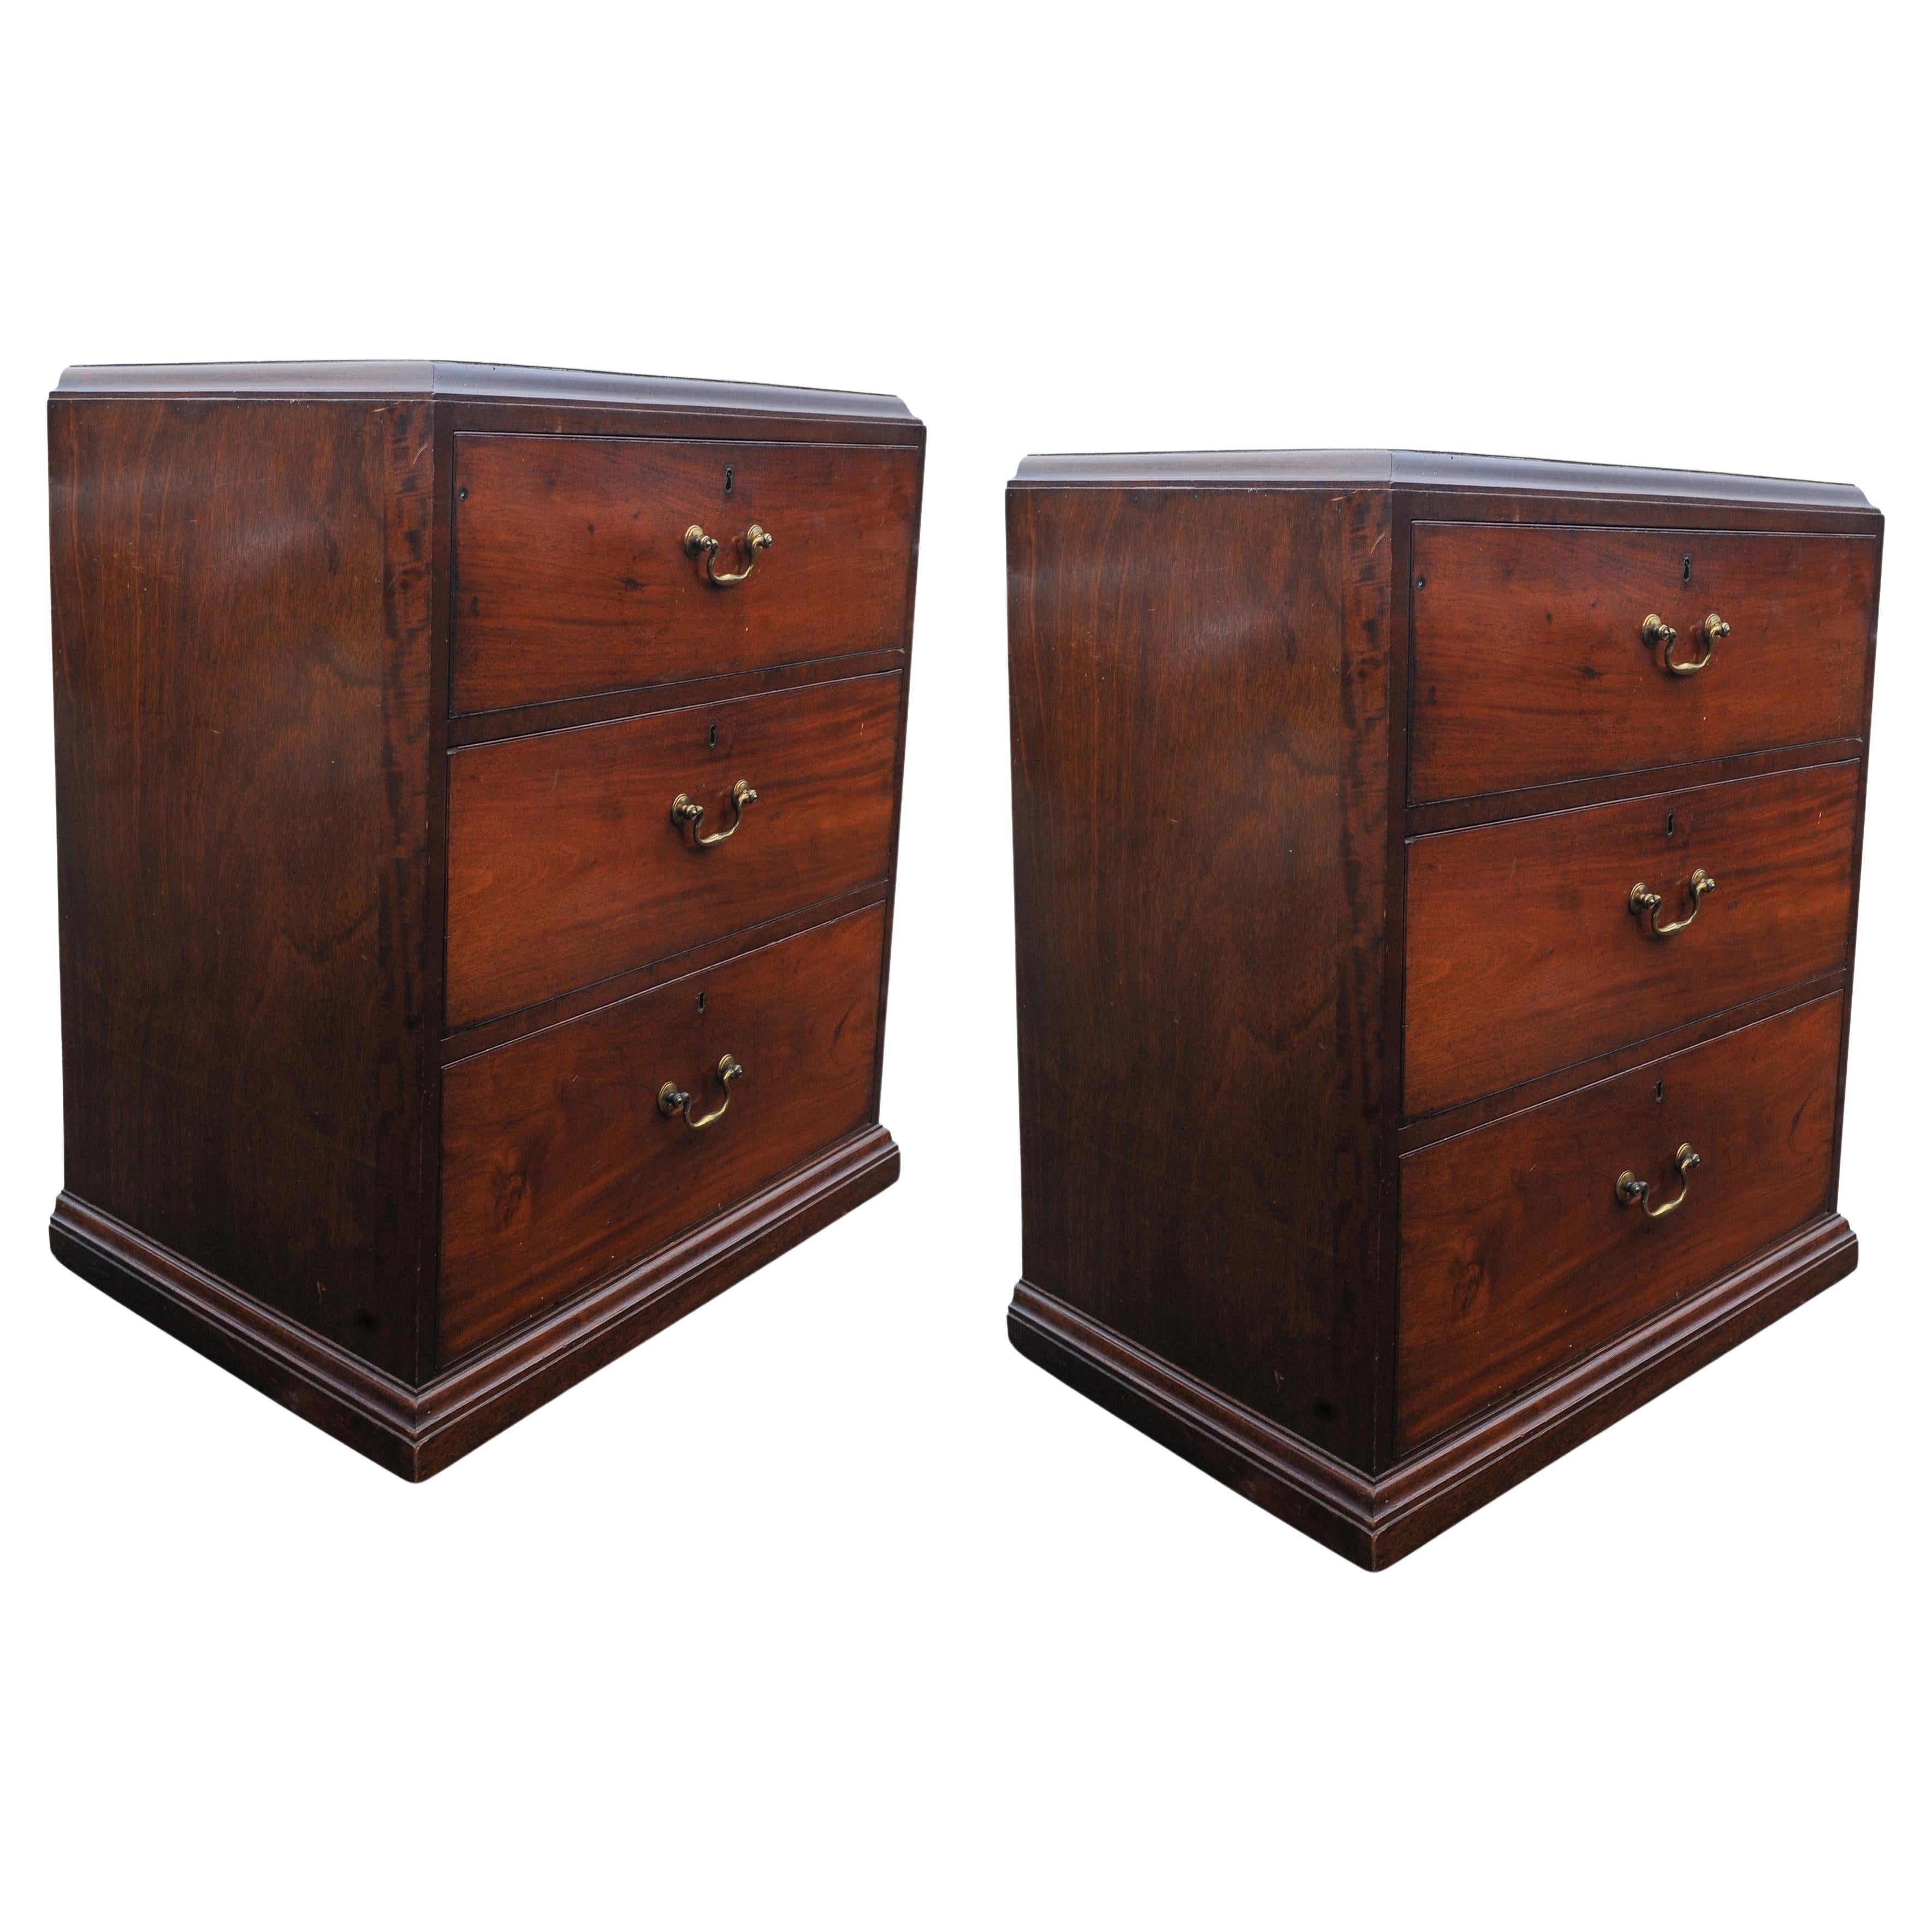 Pair of Georgian Three Drawer Bedside Chests with Brass Handles